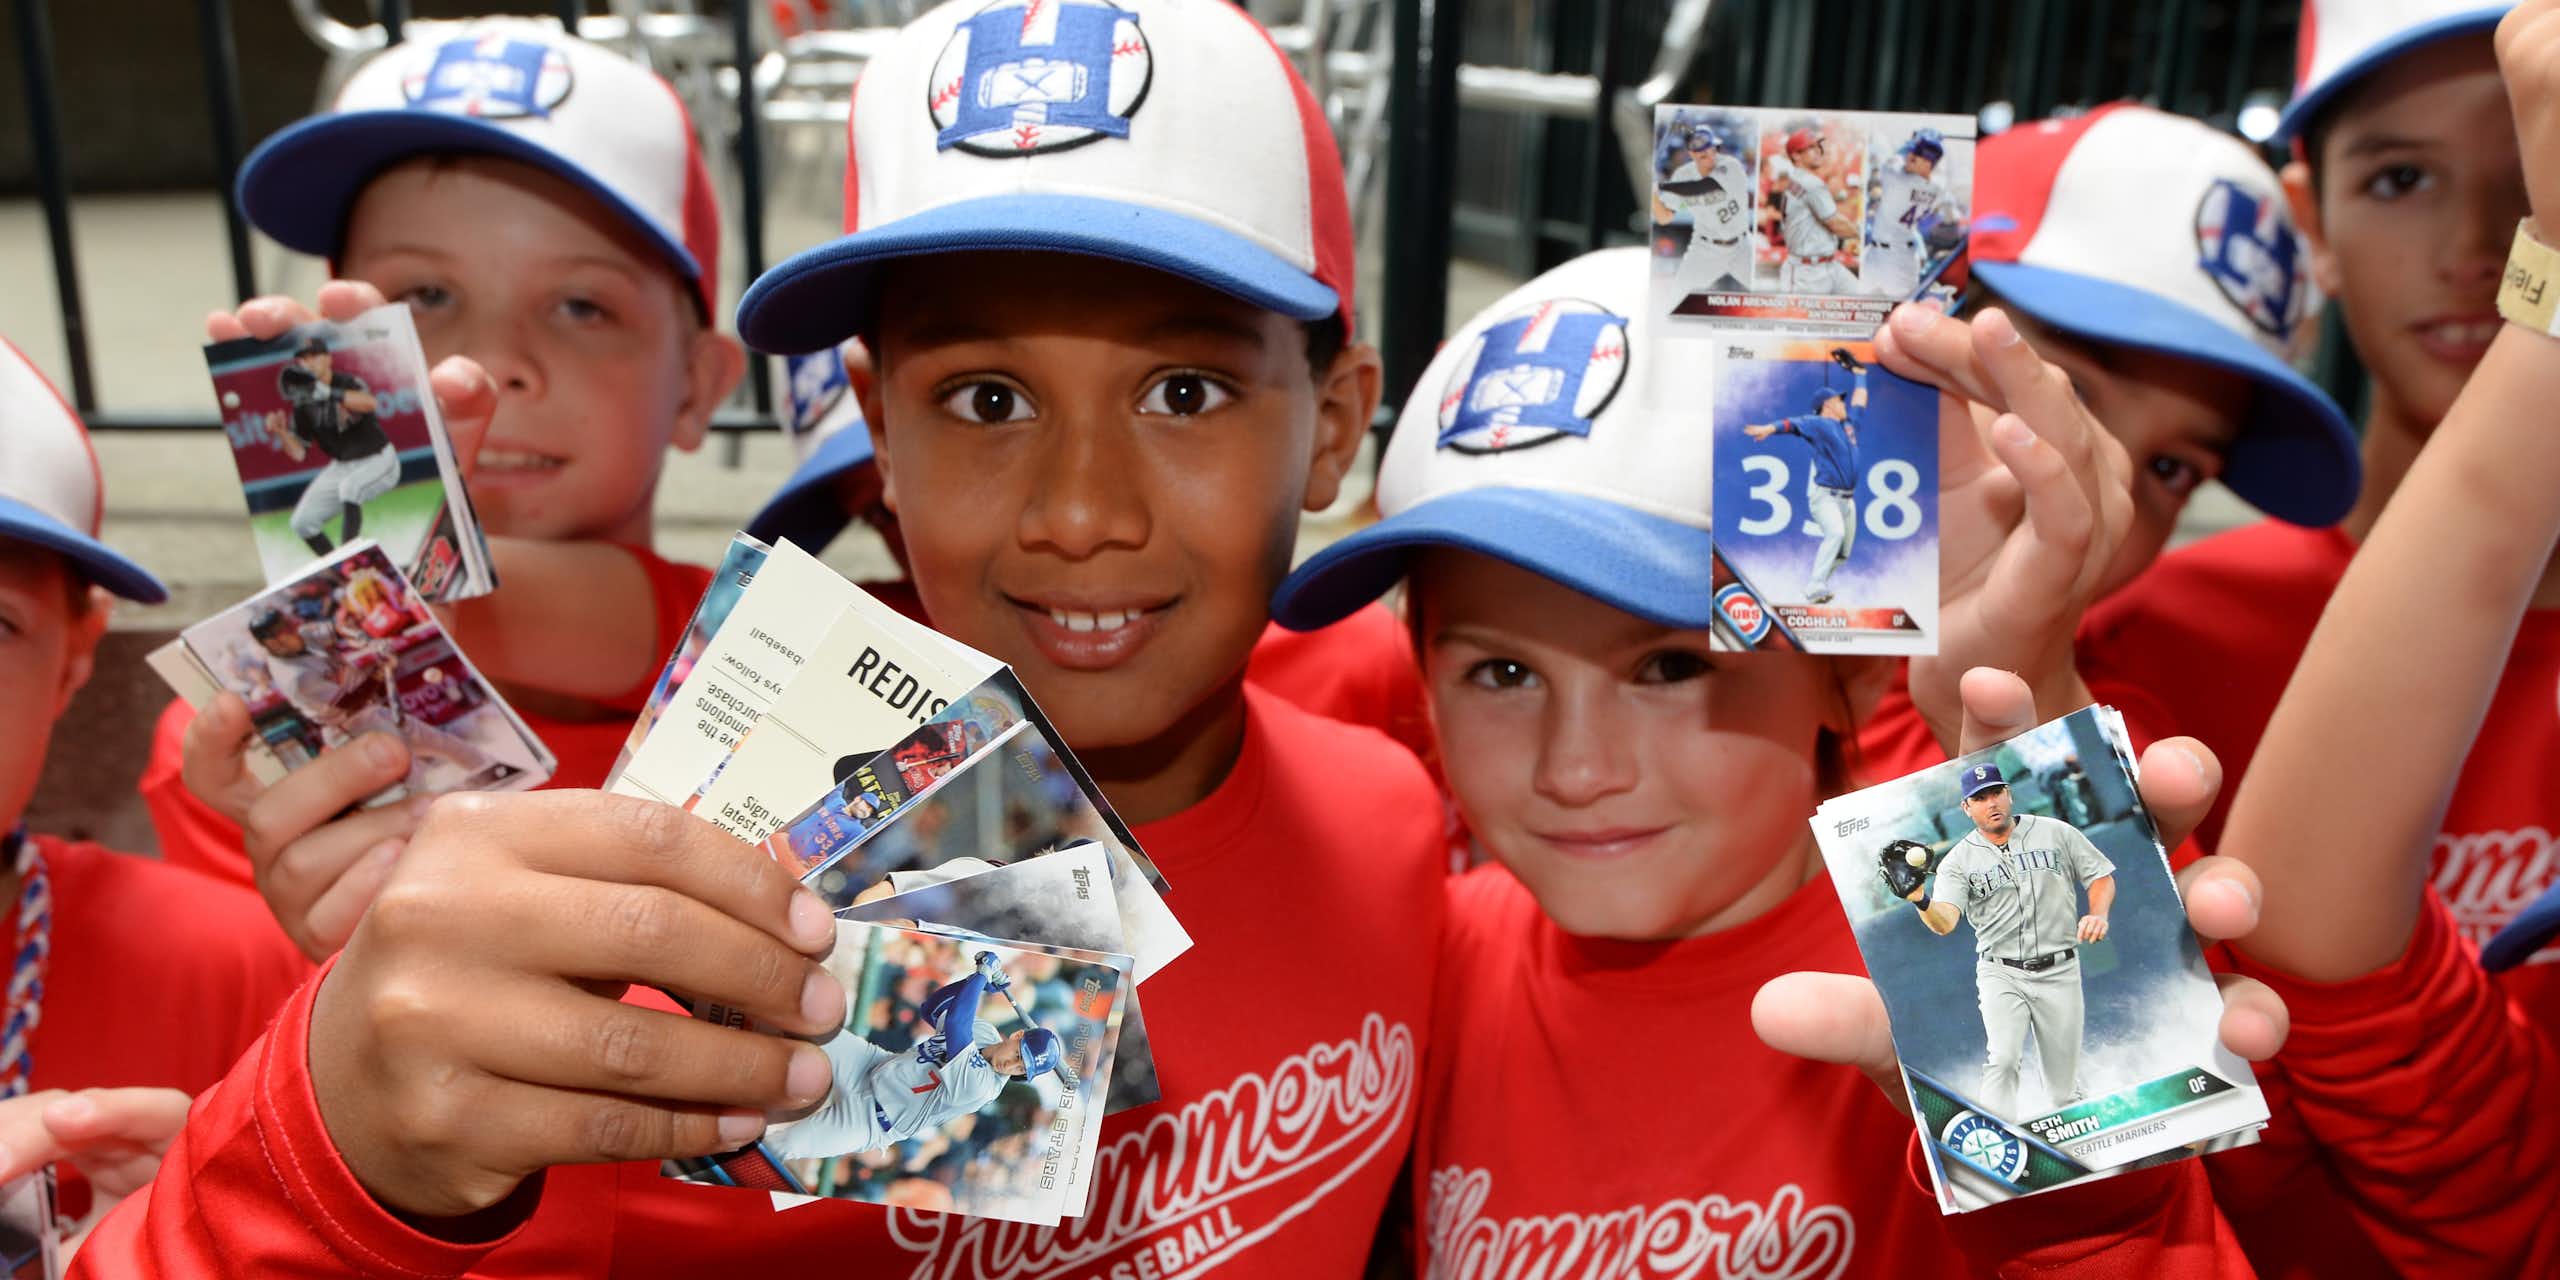 A group of young fans wearing ballcaps red baseball uniforms hold up their baseball cards.